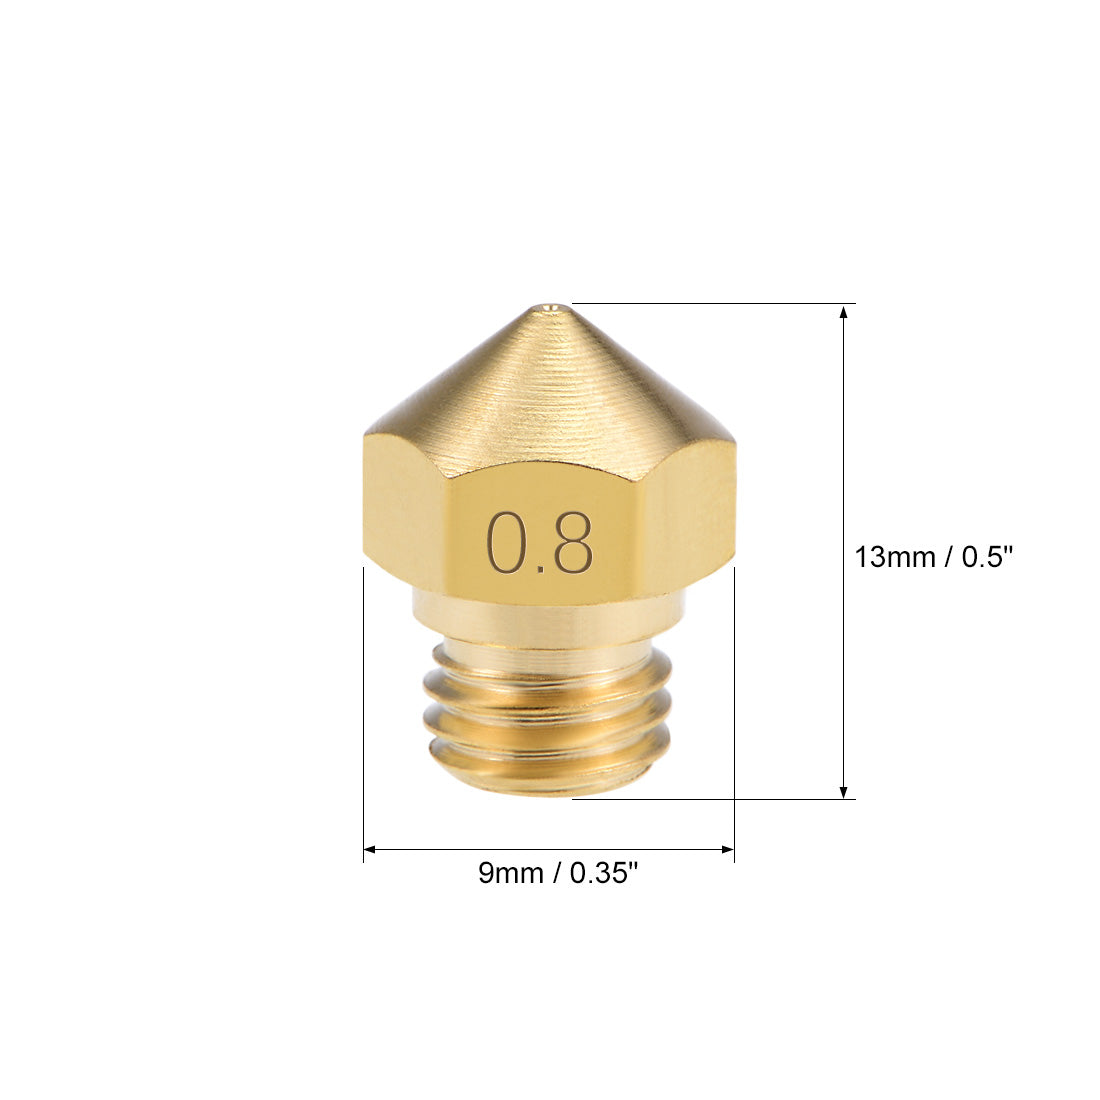 uxcell Uxcell 0.8mm 3D Printer Nozzle Head M7 Thread Replacement for MK10 1.75mm Extruder Print, Brass 10pcs